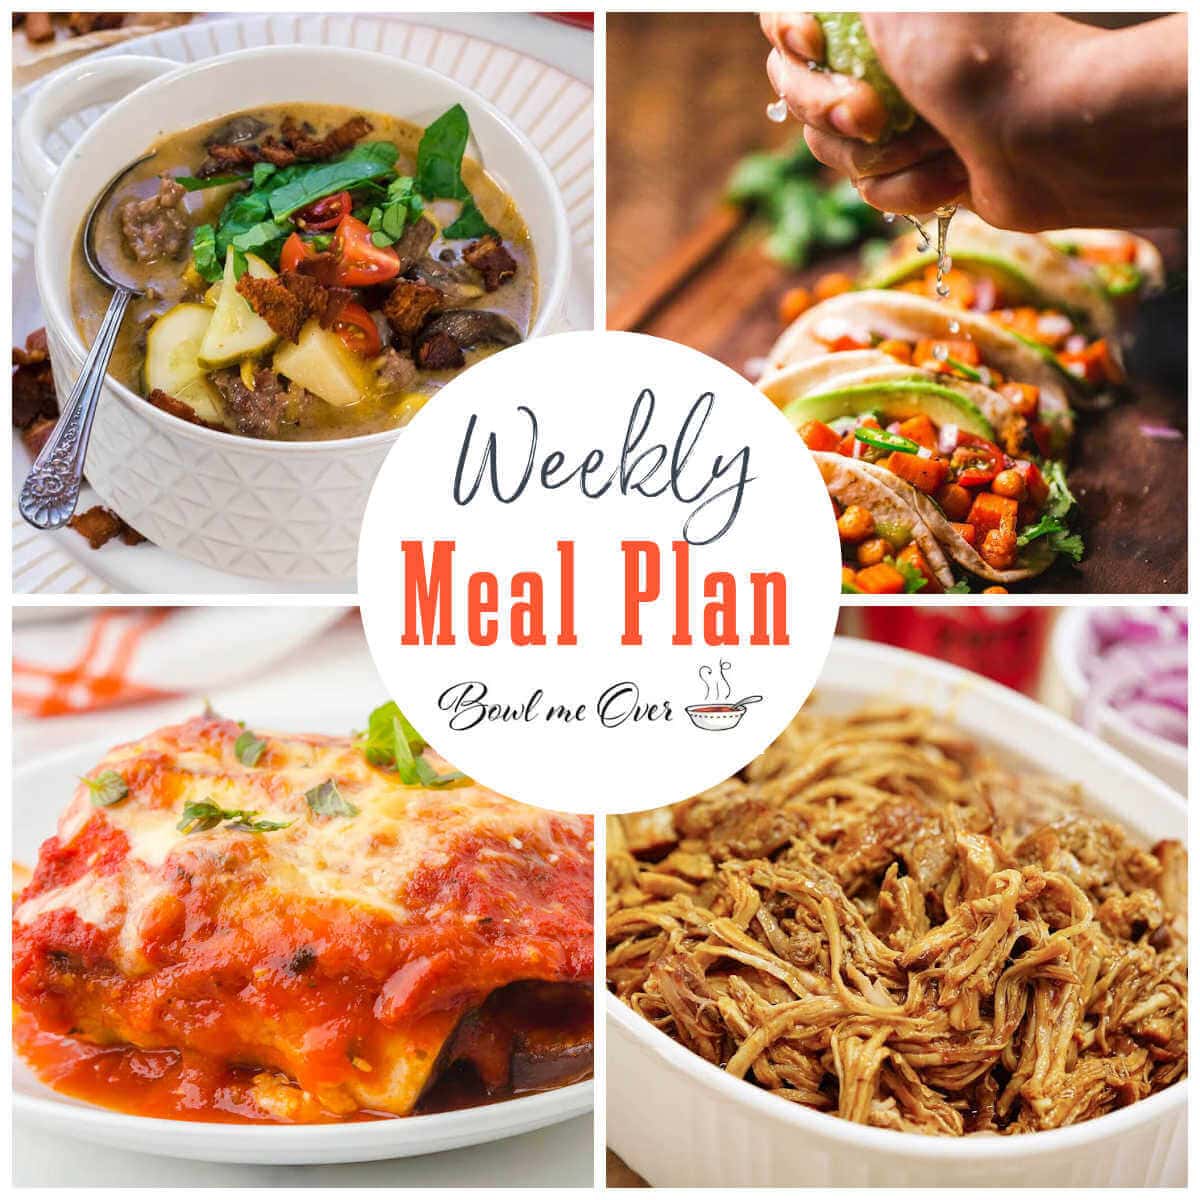 Weekly Meal Plan 6 collage of photos, with print overlay.